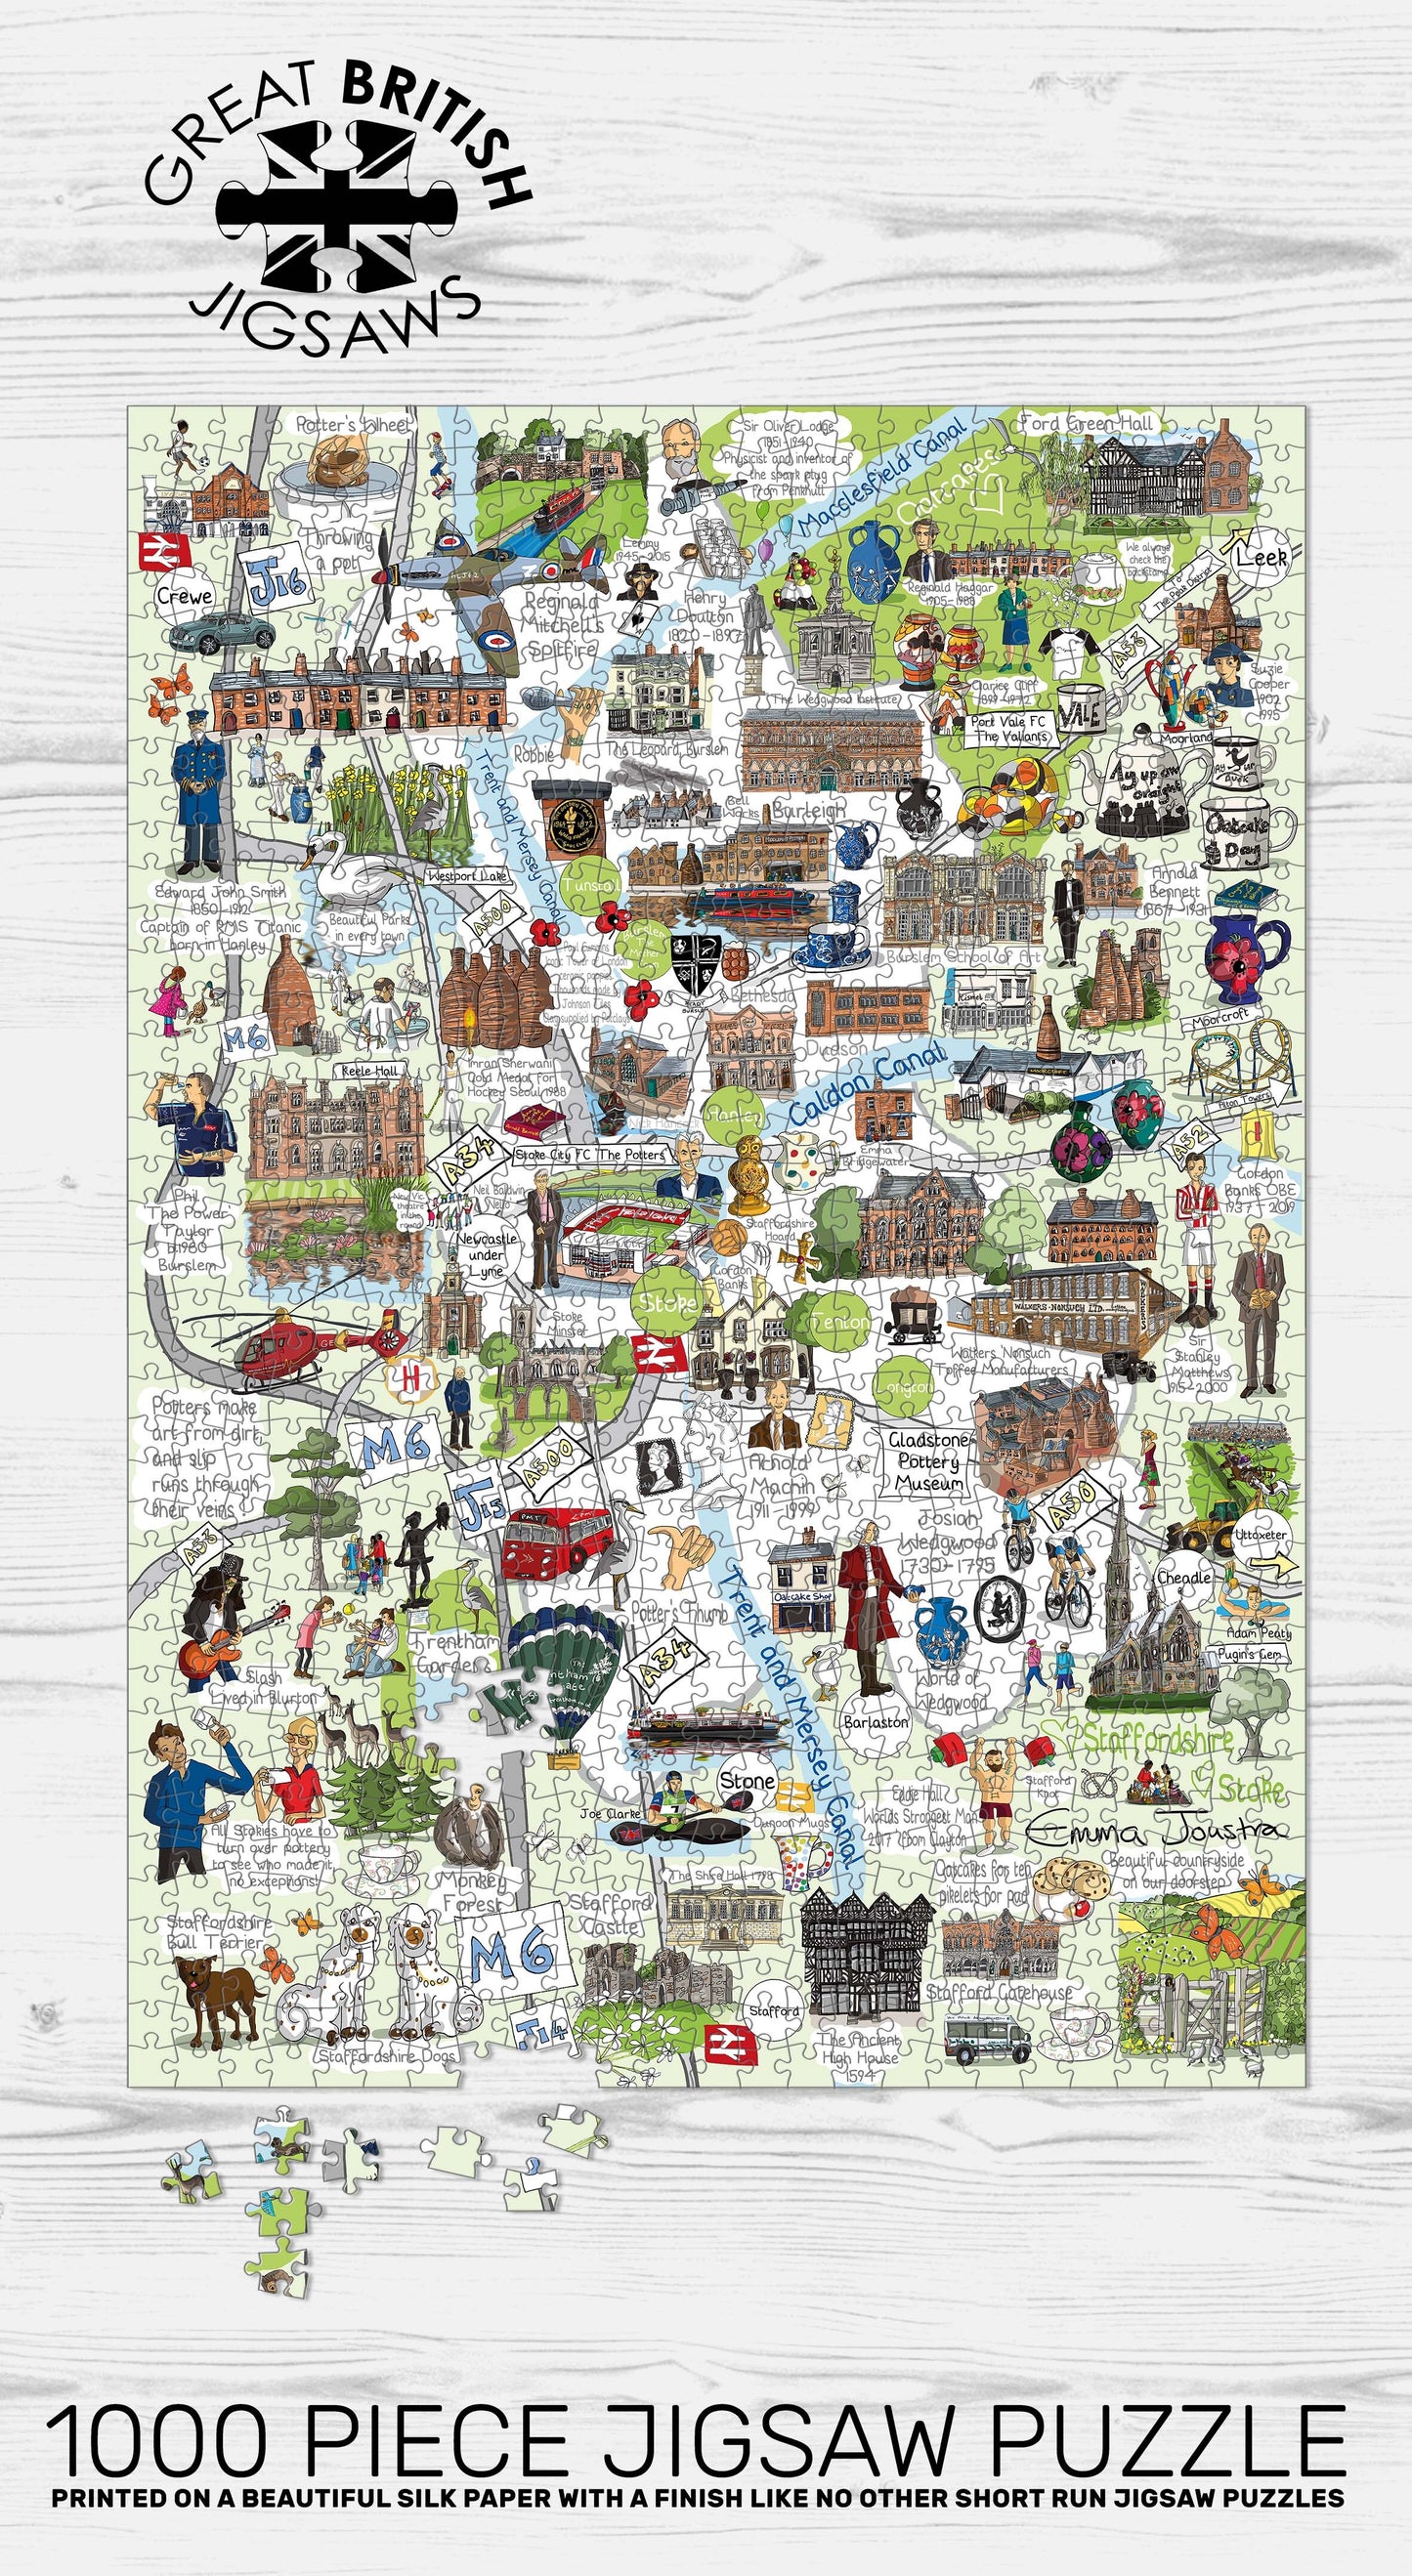 Six Towns of The Potteries 'Map' 1,000 piece jigsaw puzzle